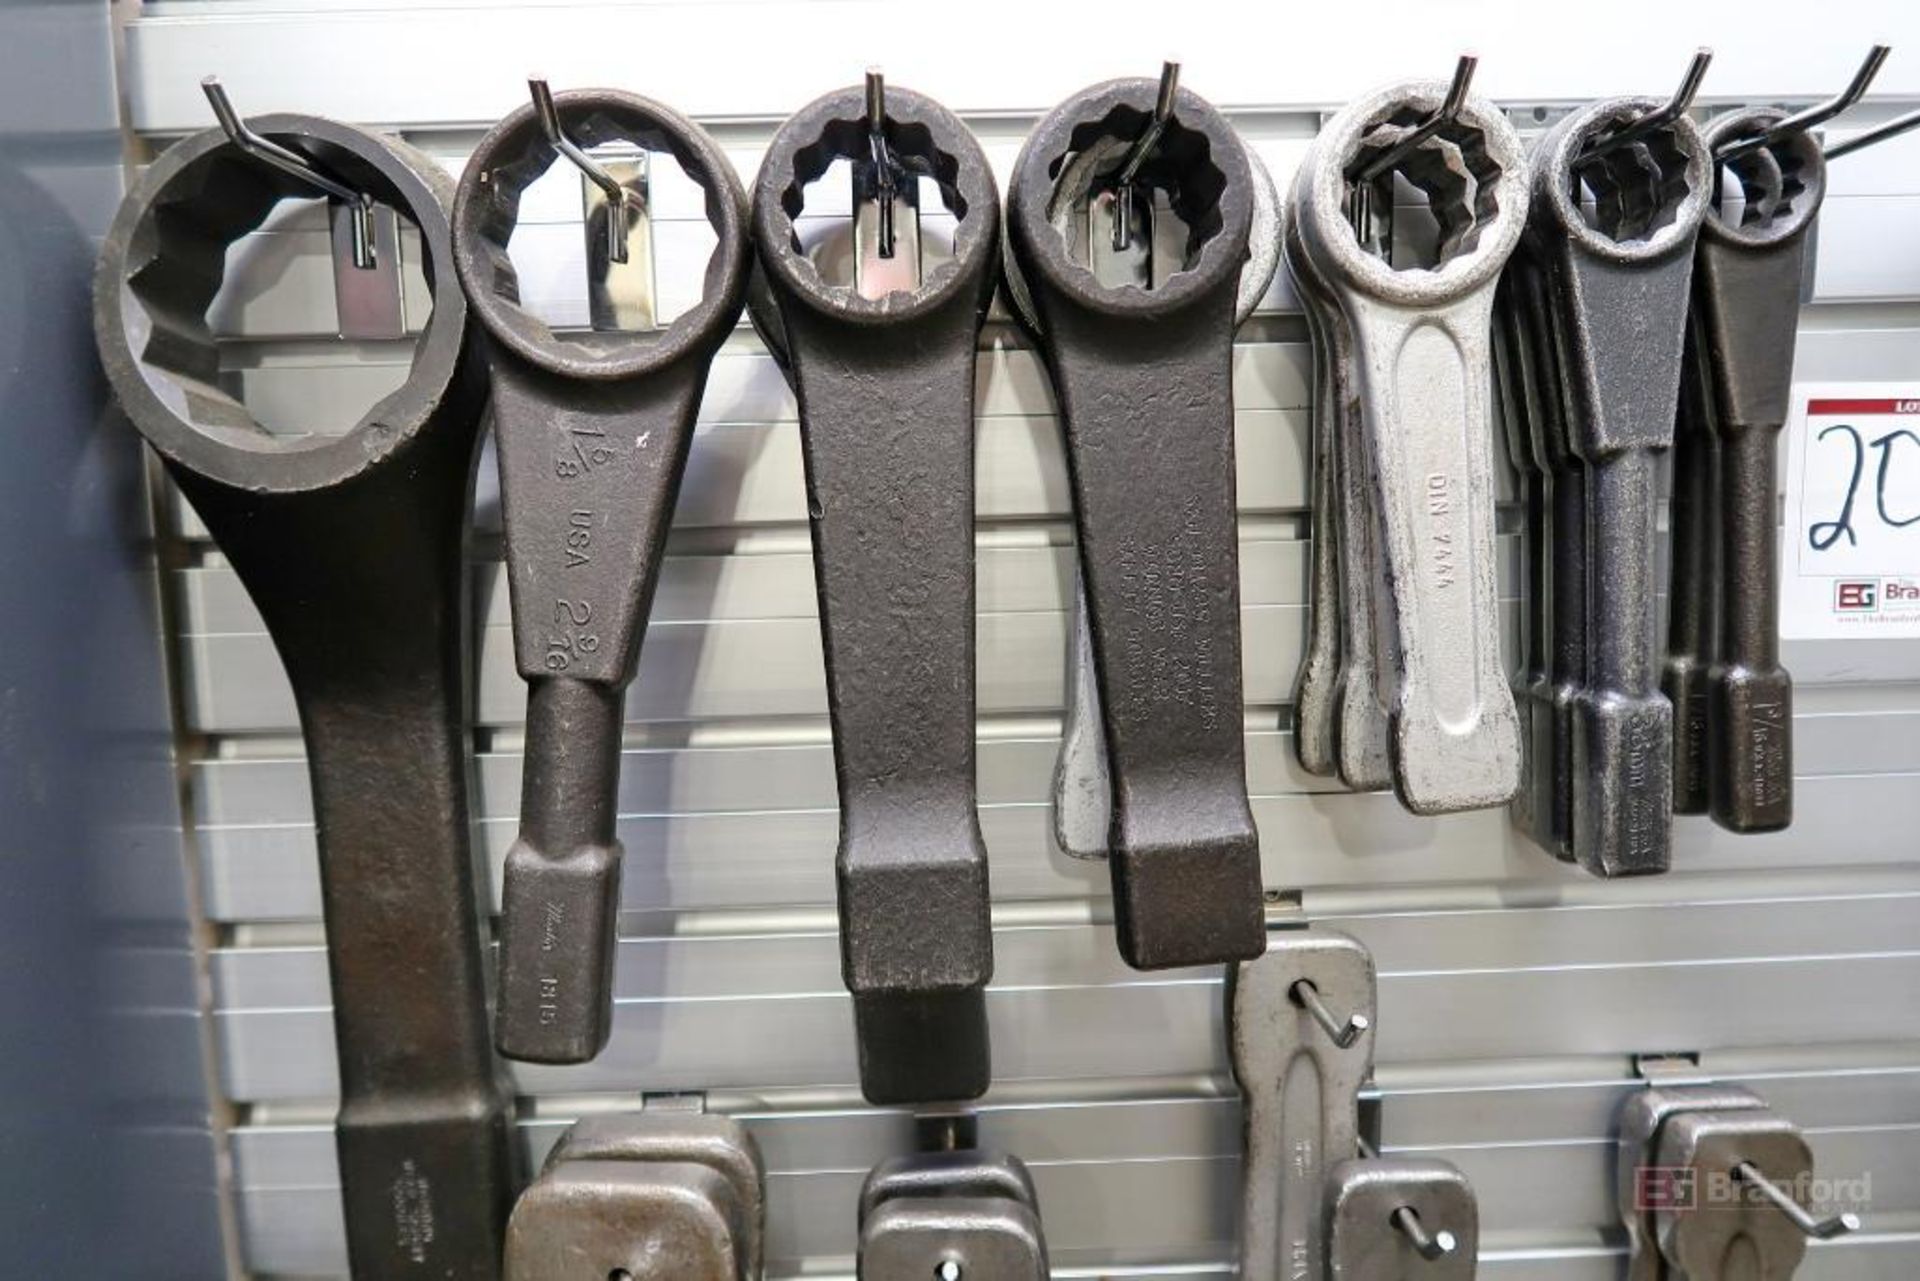 Assorted Large Tools w/ Hanging Organizer - Image 4 of 9